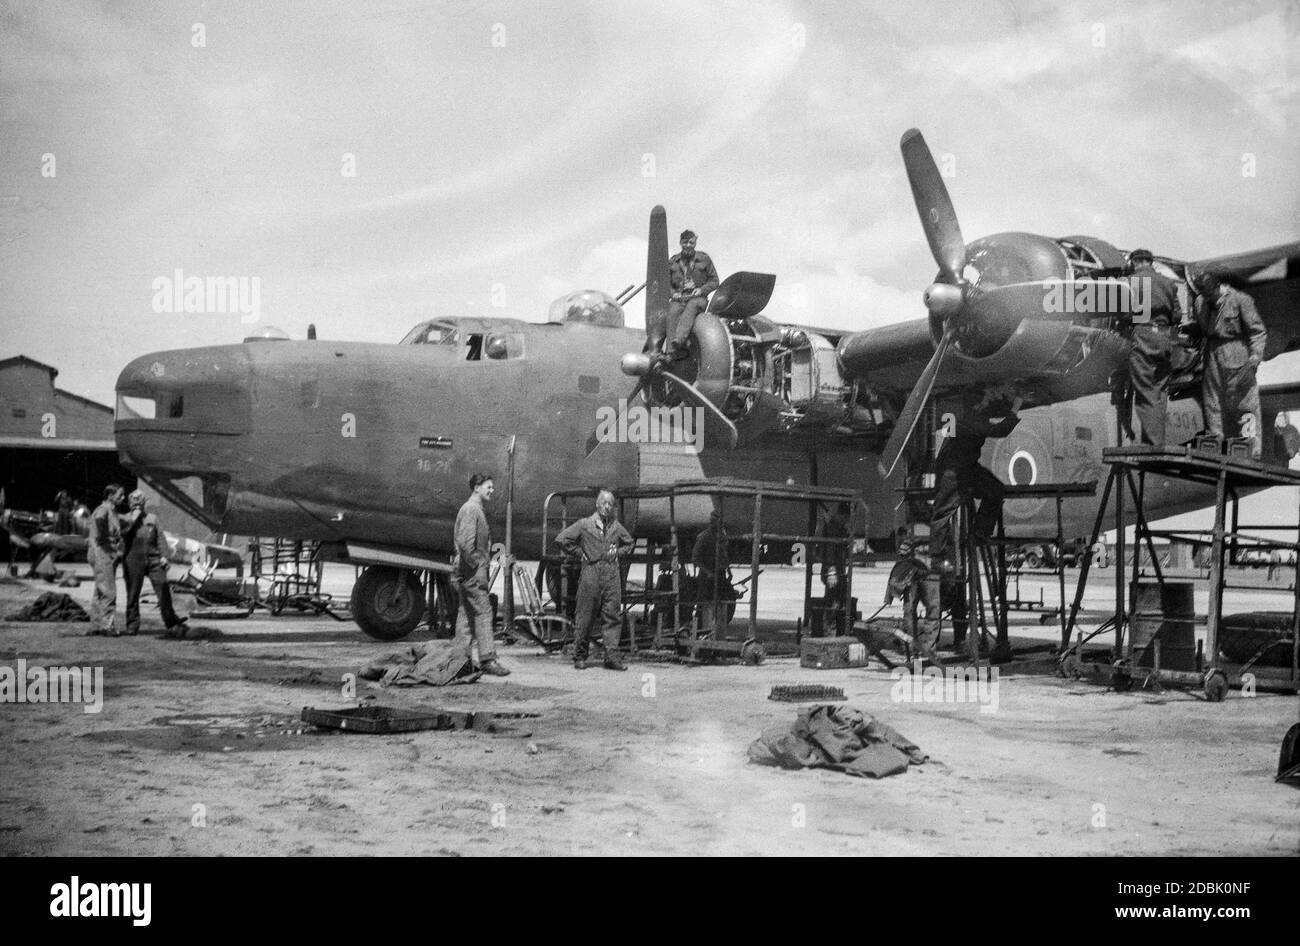 Royal Air Force Consolidated Liberator bomber transport aircraft undergoing maintenance at RAF El-Adem in Libya 1945. Now know as Gamal Abdel Nasser Airbase. Stock Photo